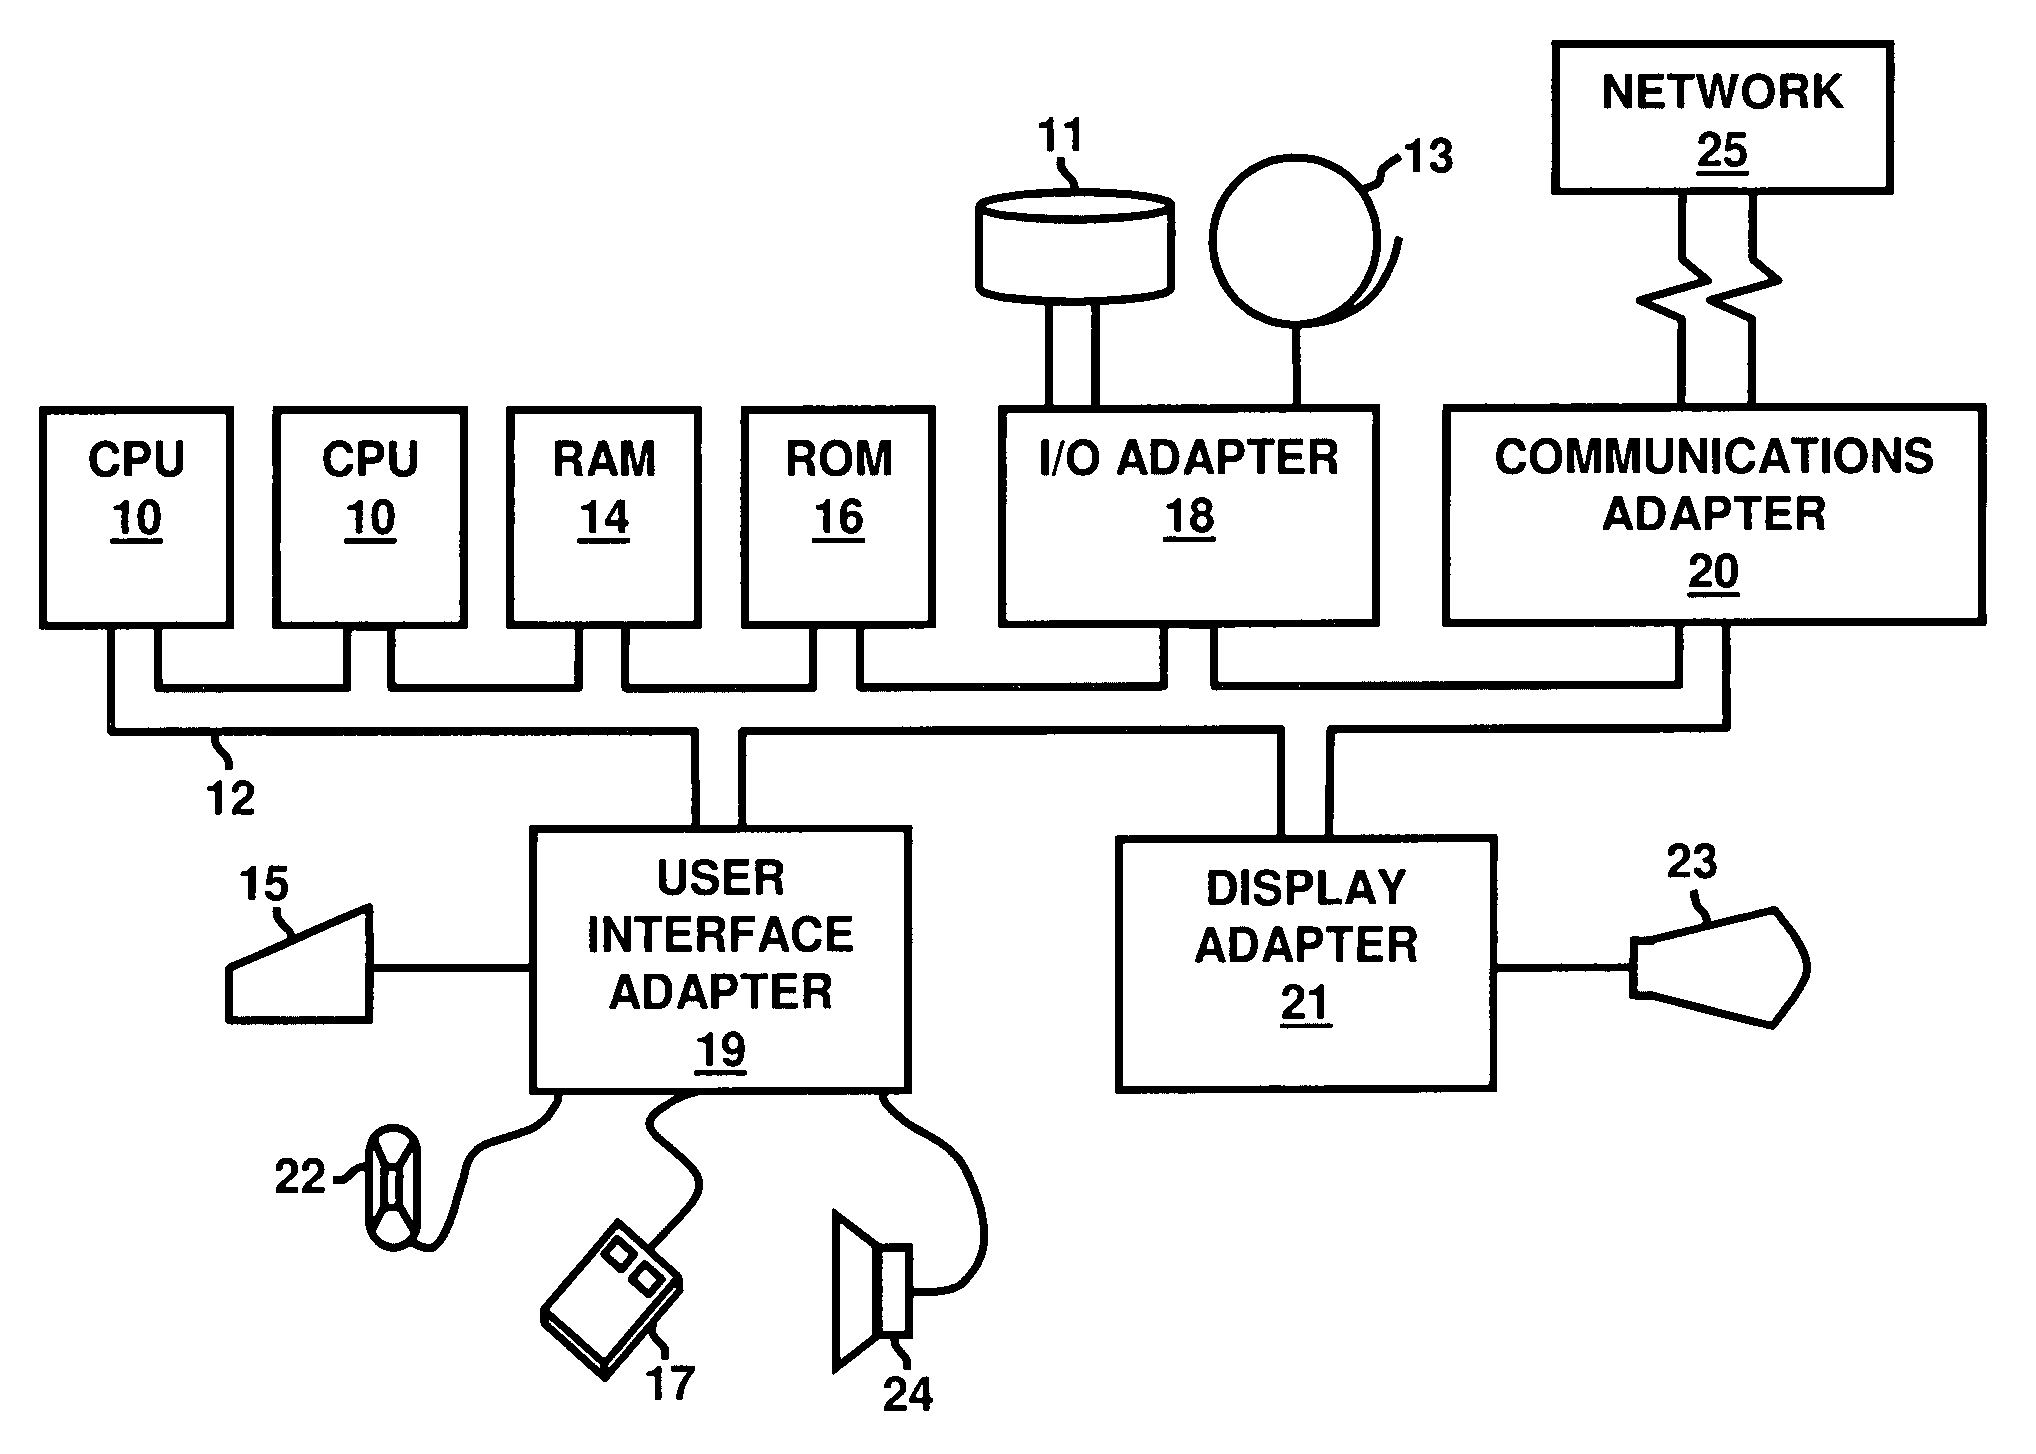 Method and Apparatus for Fast and Flexible Digital Image Compression Using Programmable Sprite Buffer